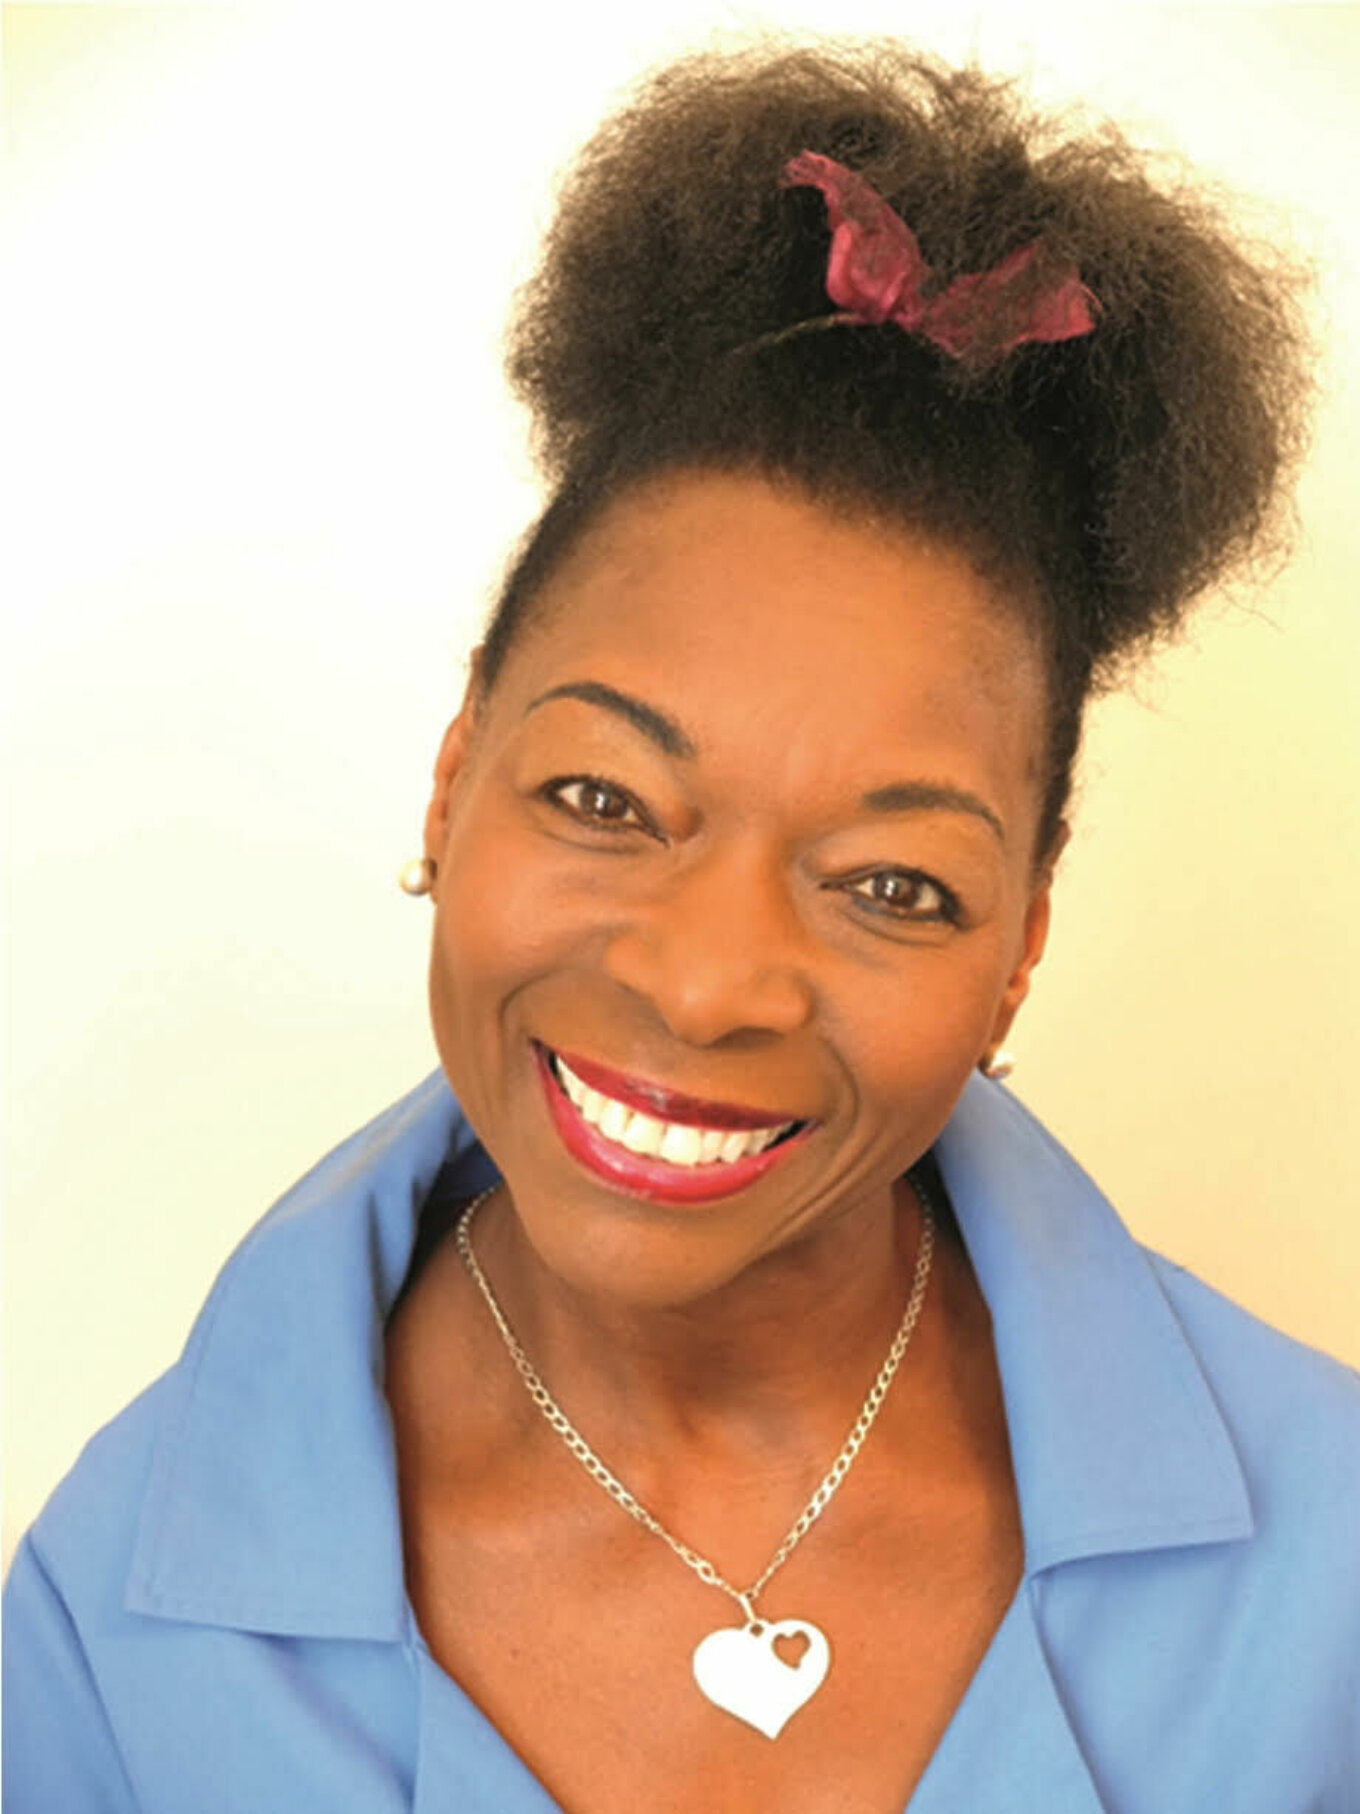 A photograph of a smiling Black woman